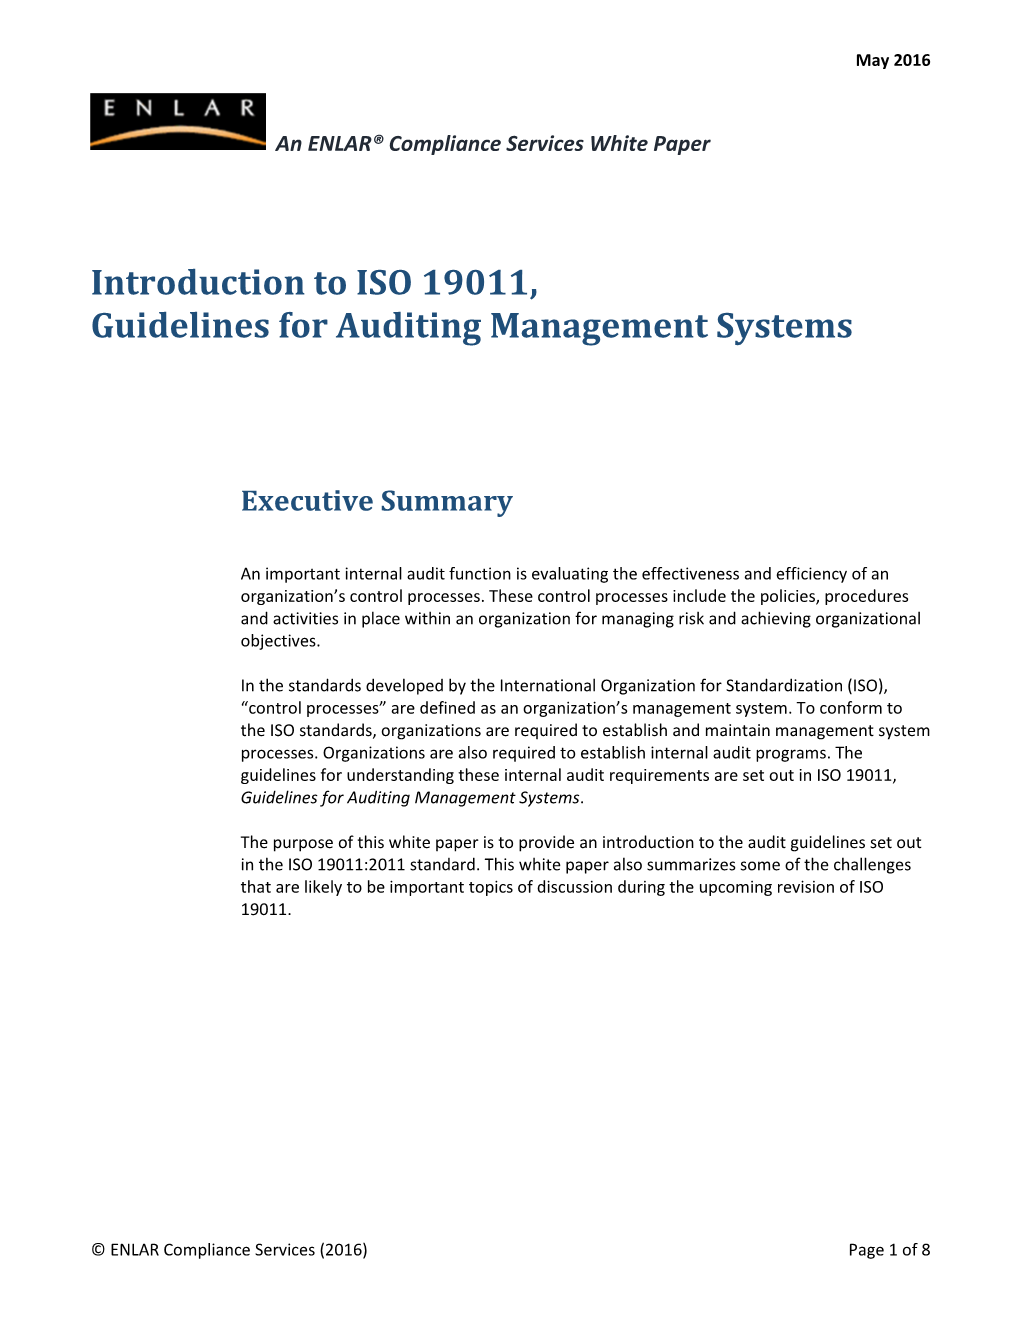 Introduction to ISO 19011, Guidelines for Uditing Management Systems